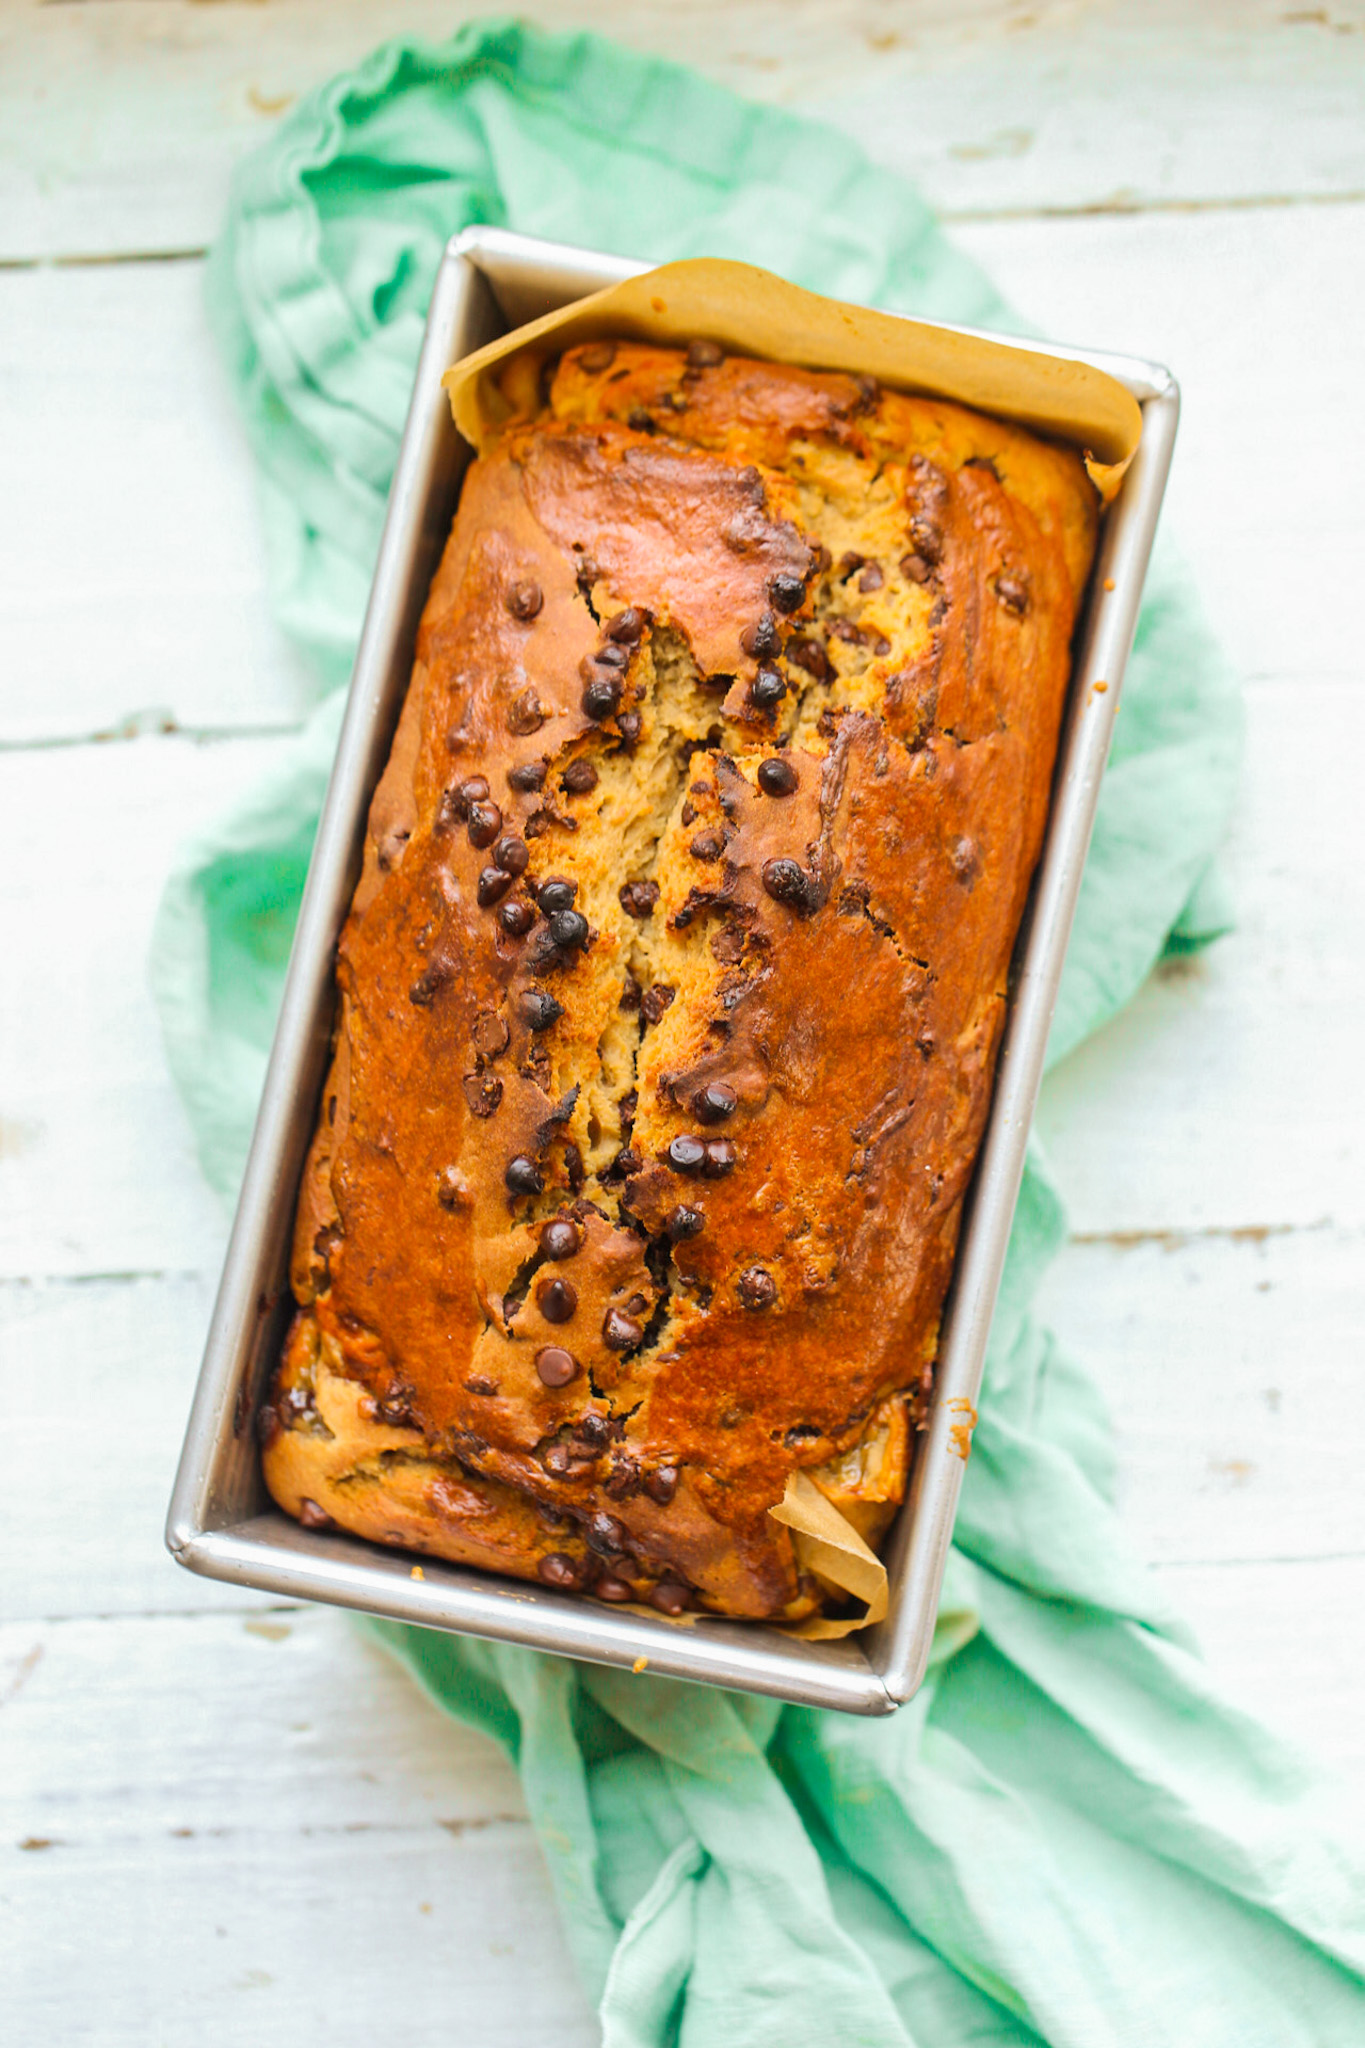 banana bread loaf with teal napkin